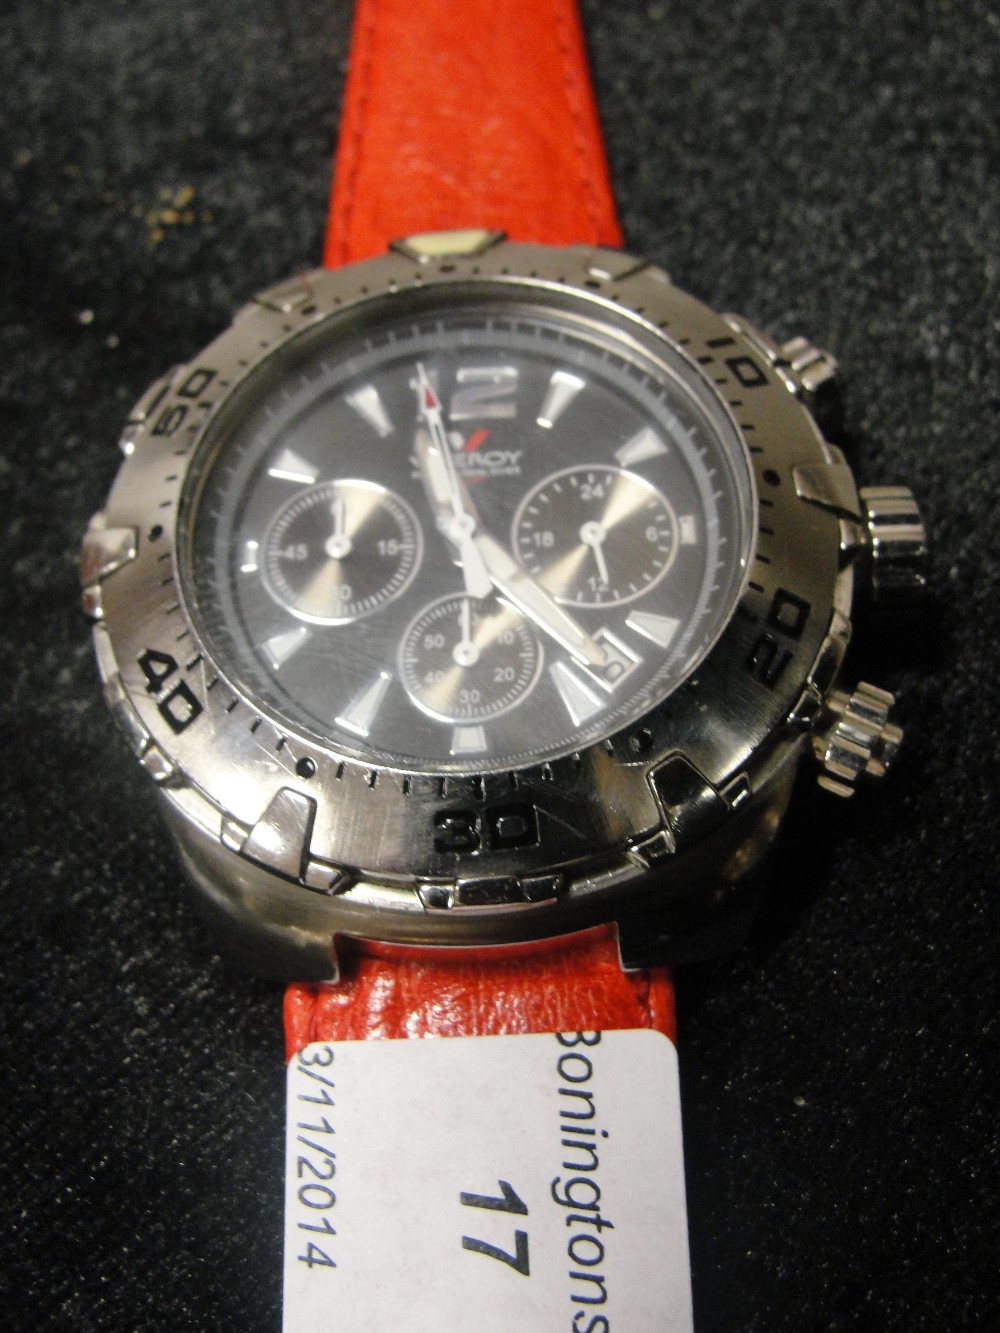 A Viceroy Professional Diver chronograph